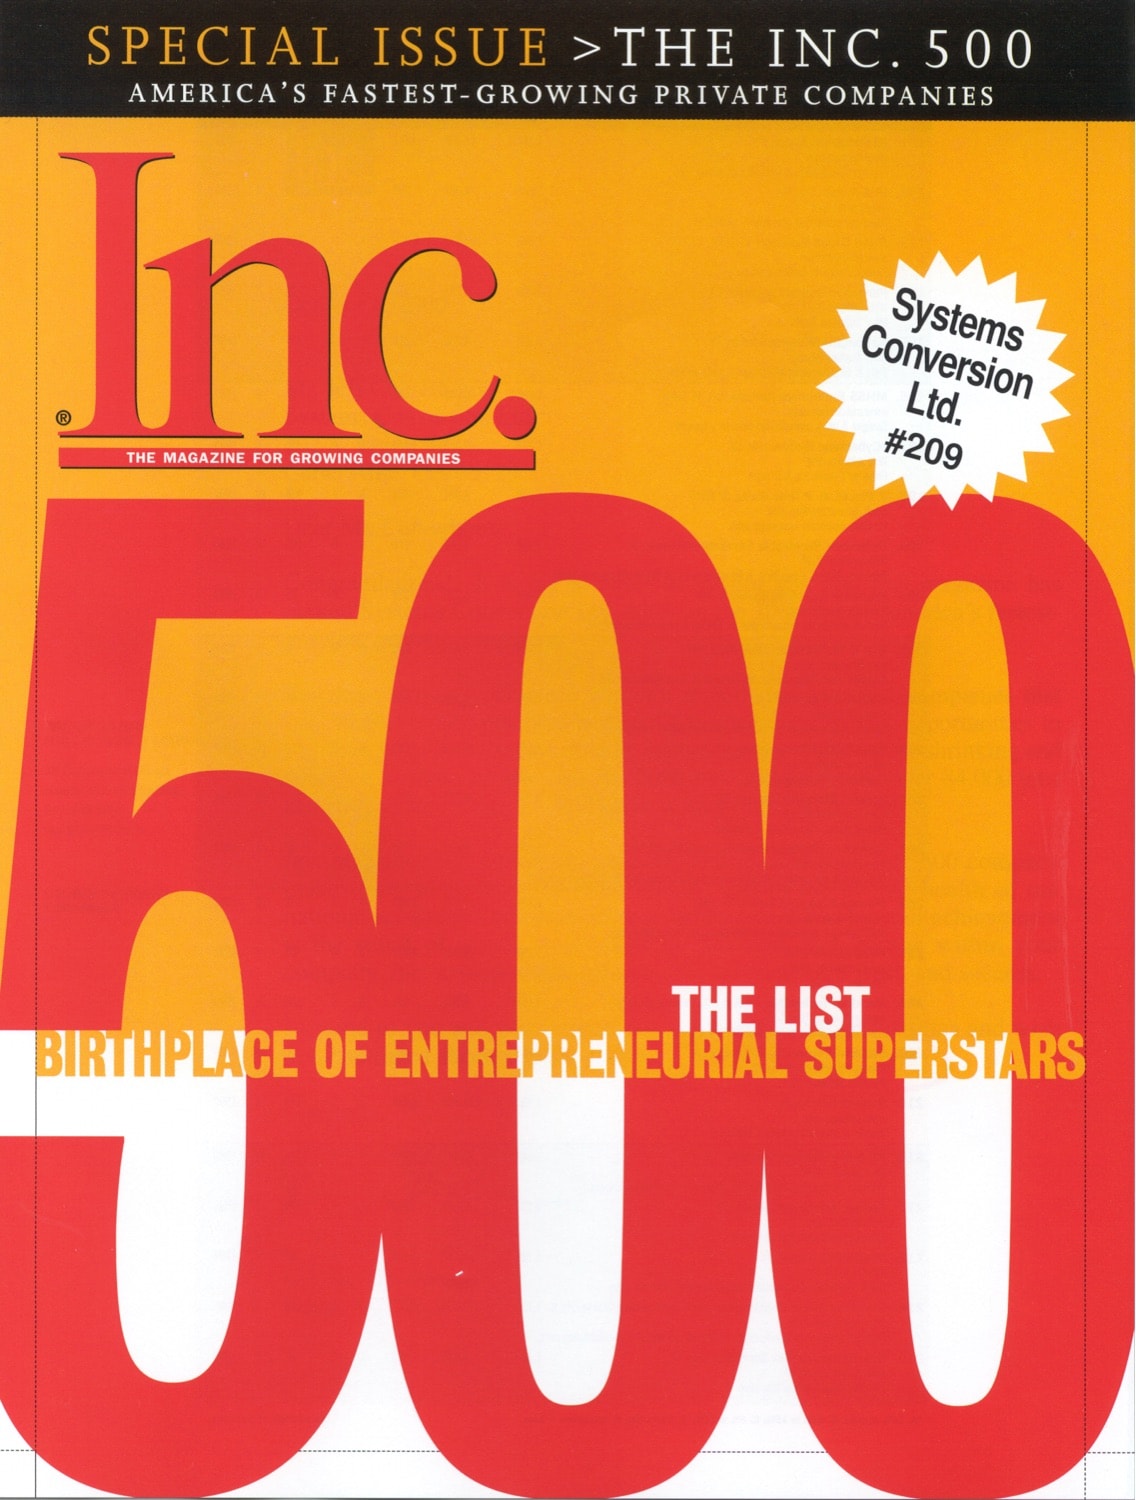 Named by INC Magazine as one of the fastest-growing privately held companies in the US